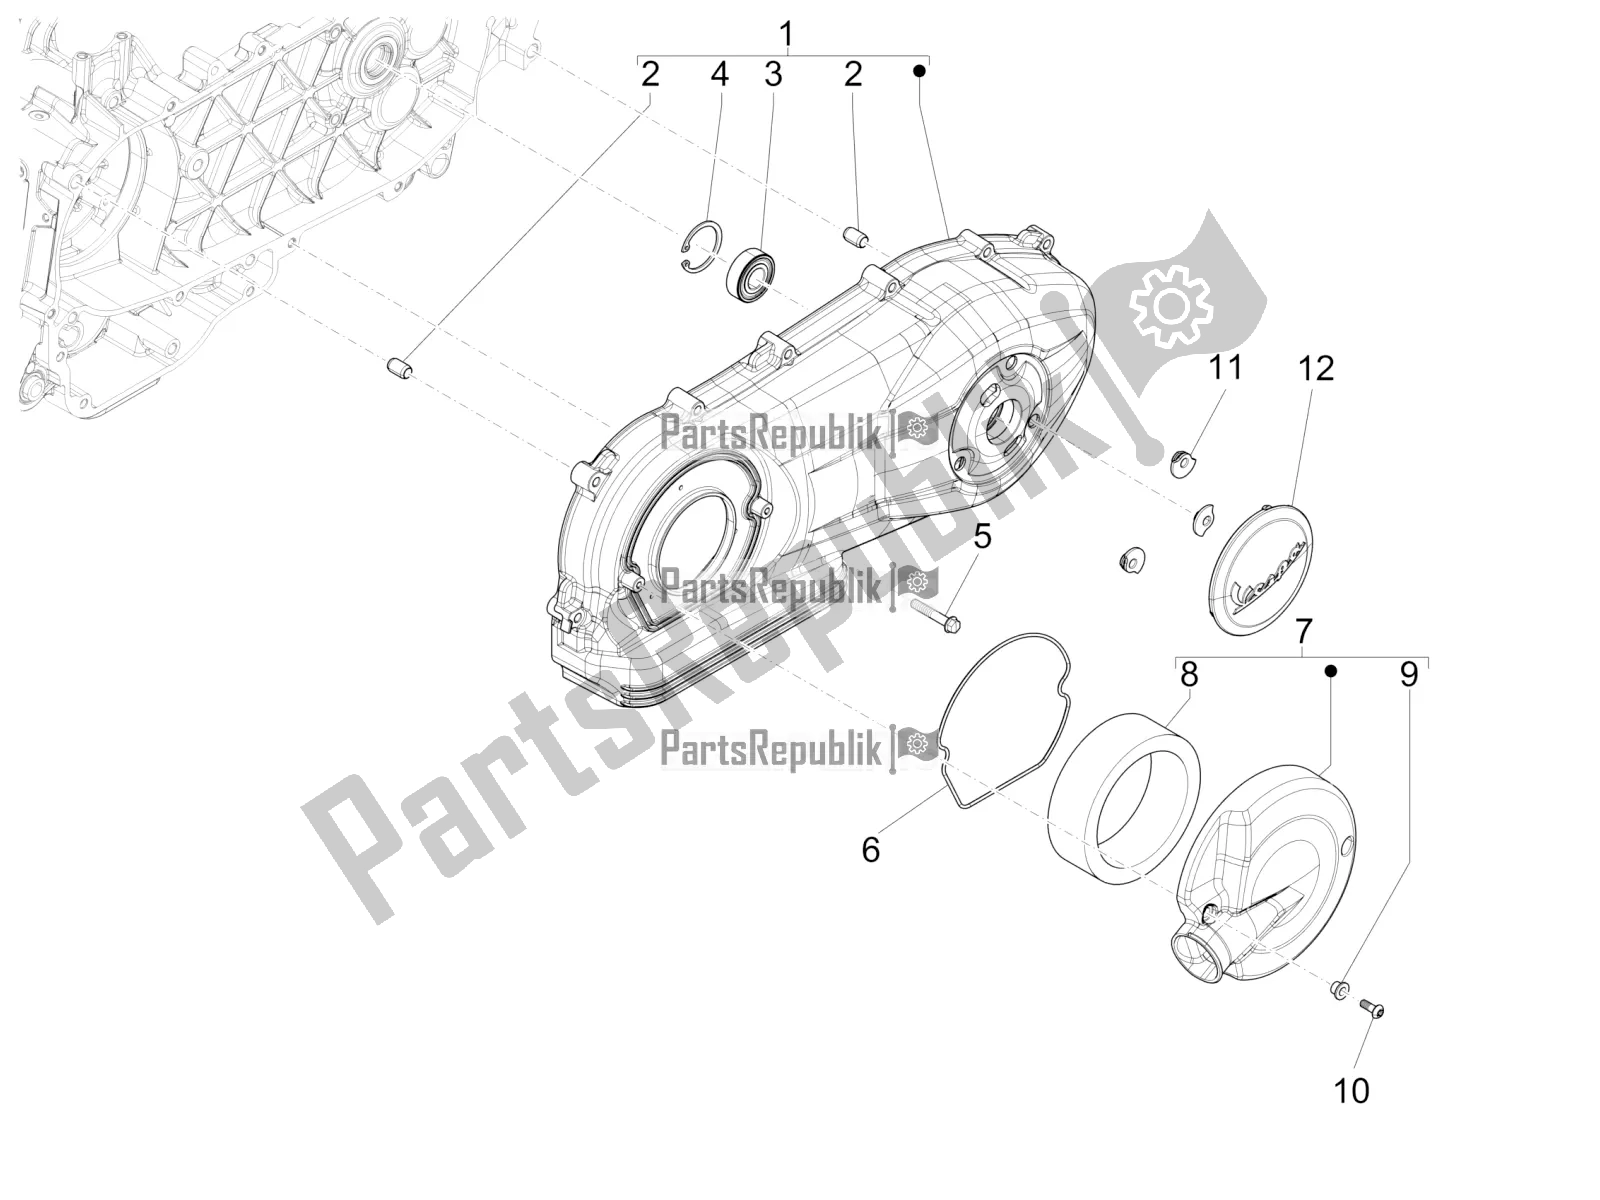 All parts for the Crankcase Cover - Crankcase Cooling of the Vespa 946 125 4T 3V ABS-Armani 2016